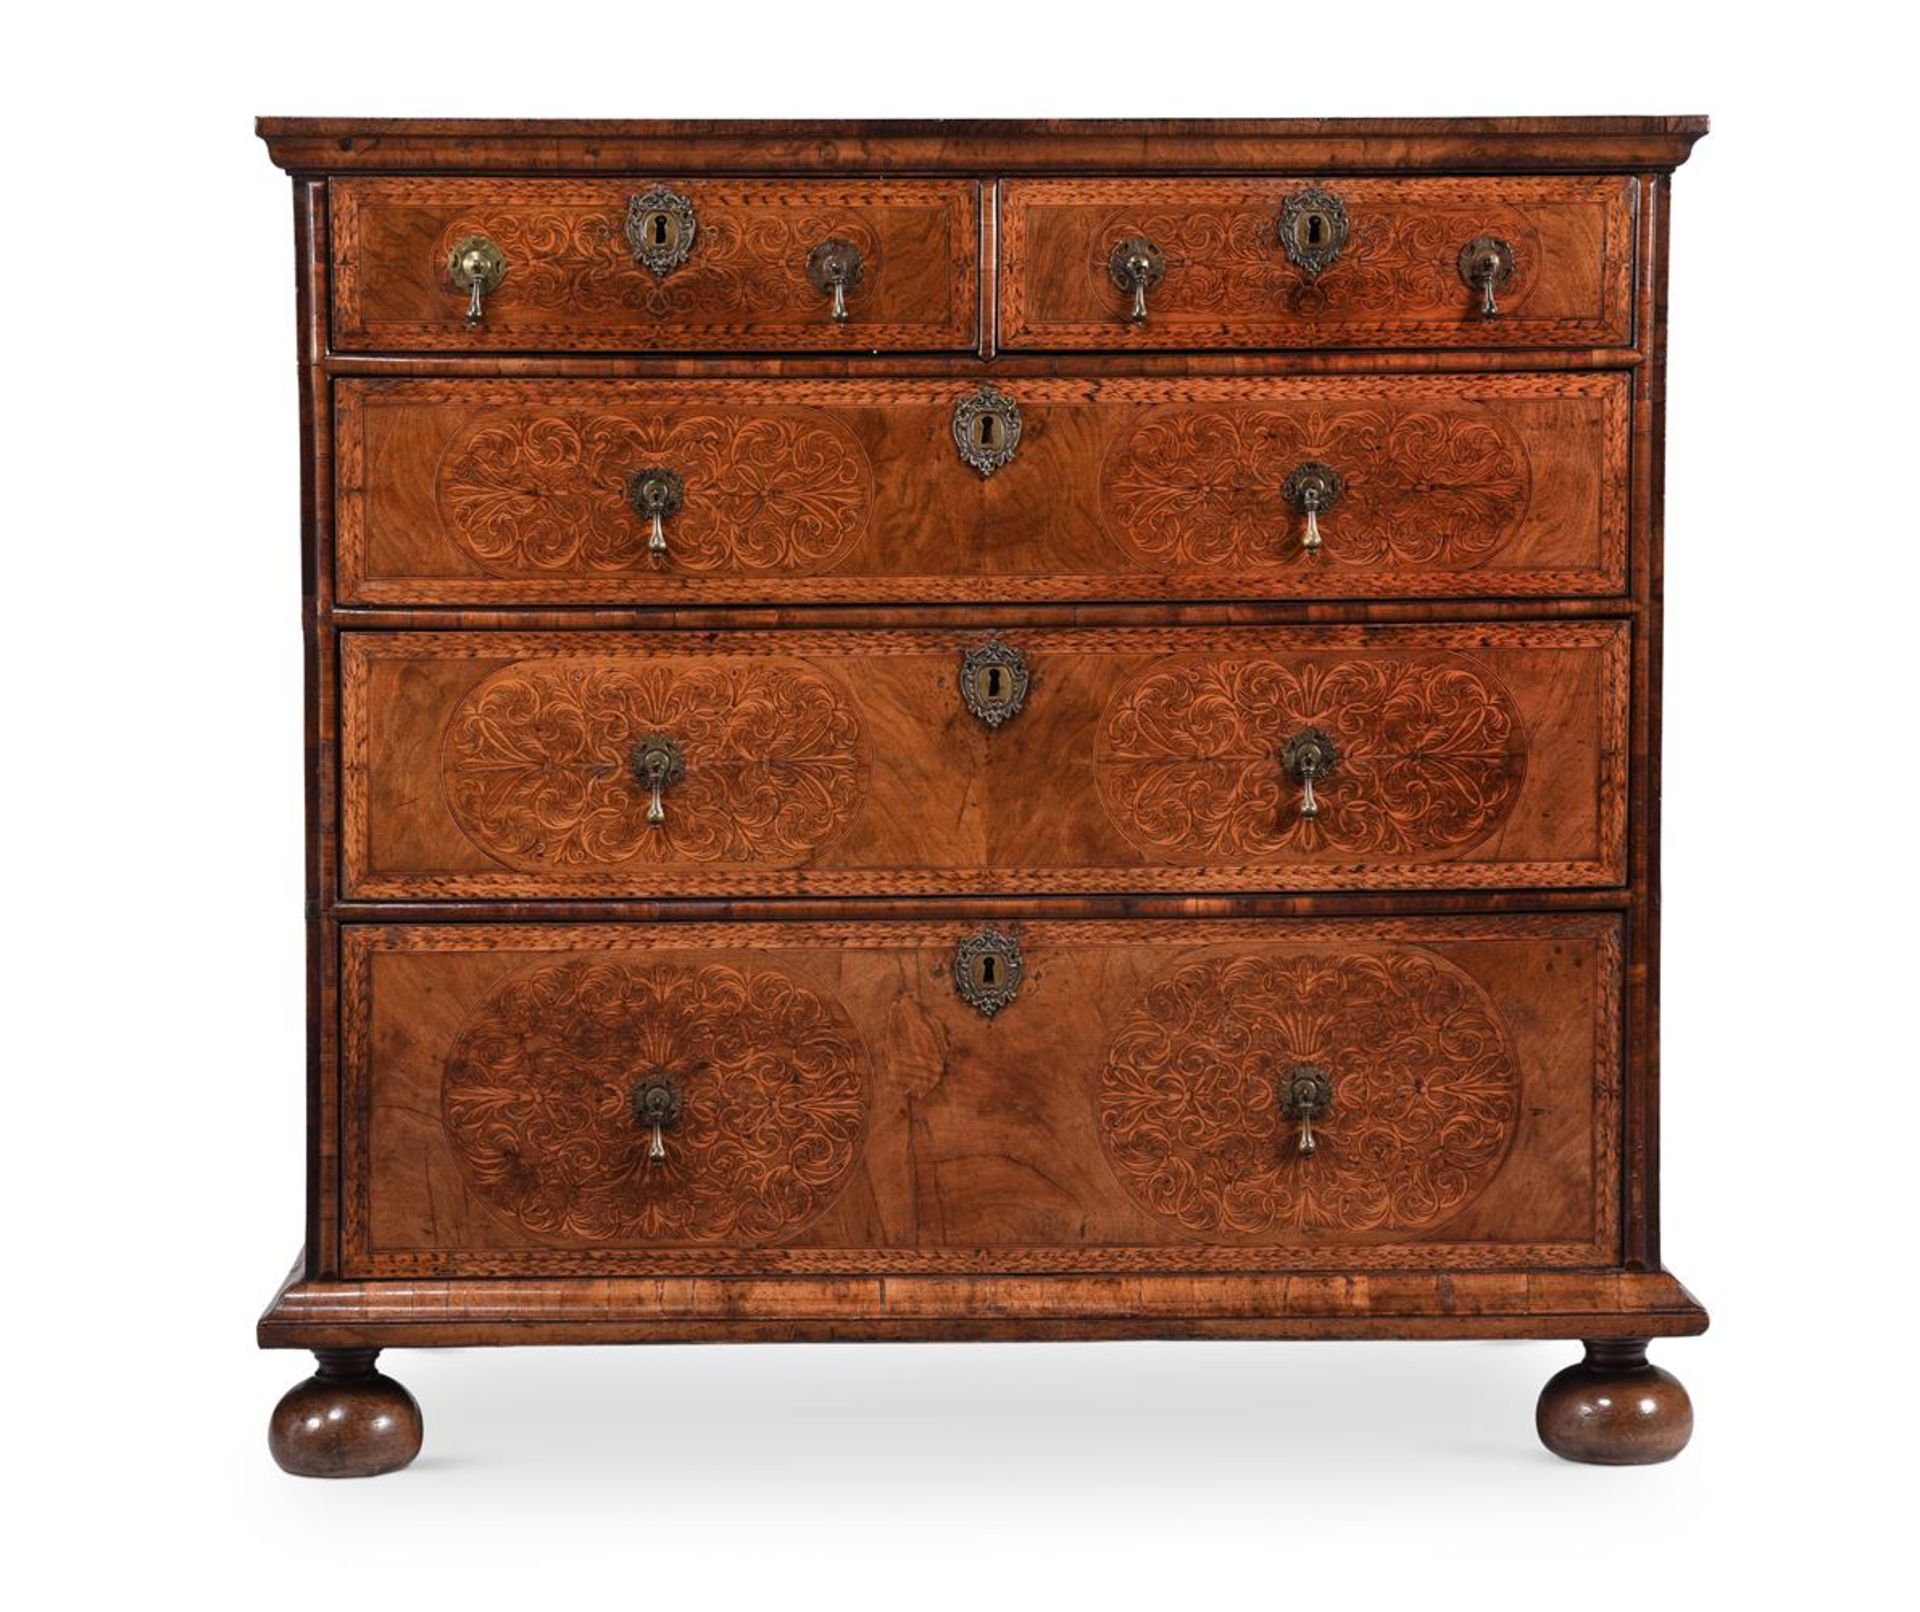 A WILLIAM & MARY WALNUT AND SEAWEED MARQUETRY CHEST OF DRAWERSIN THE MANNER OF GERRIT JENSEN